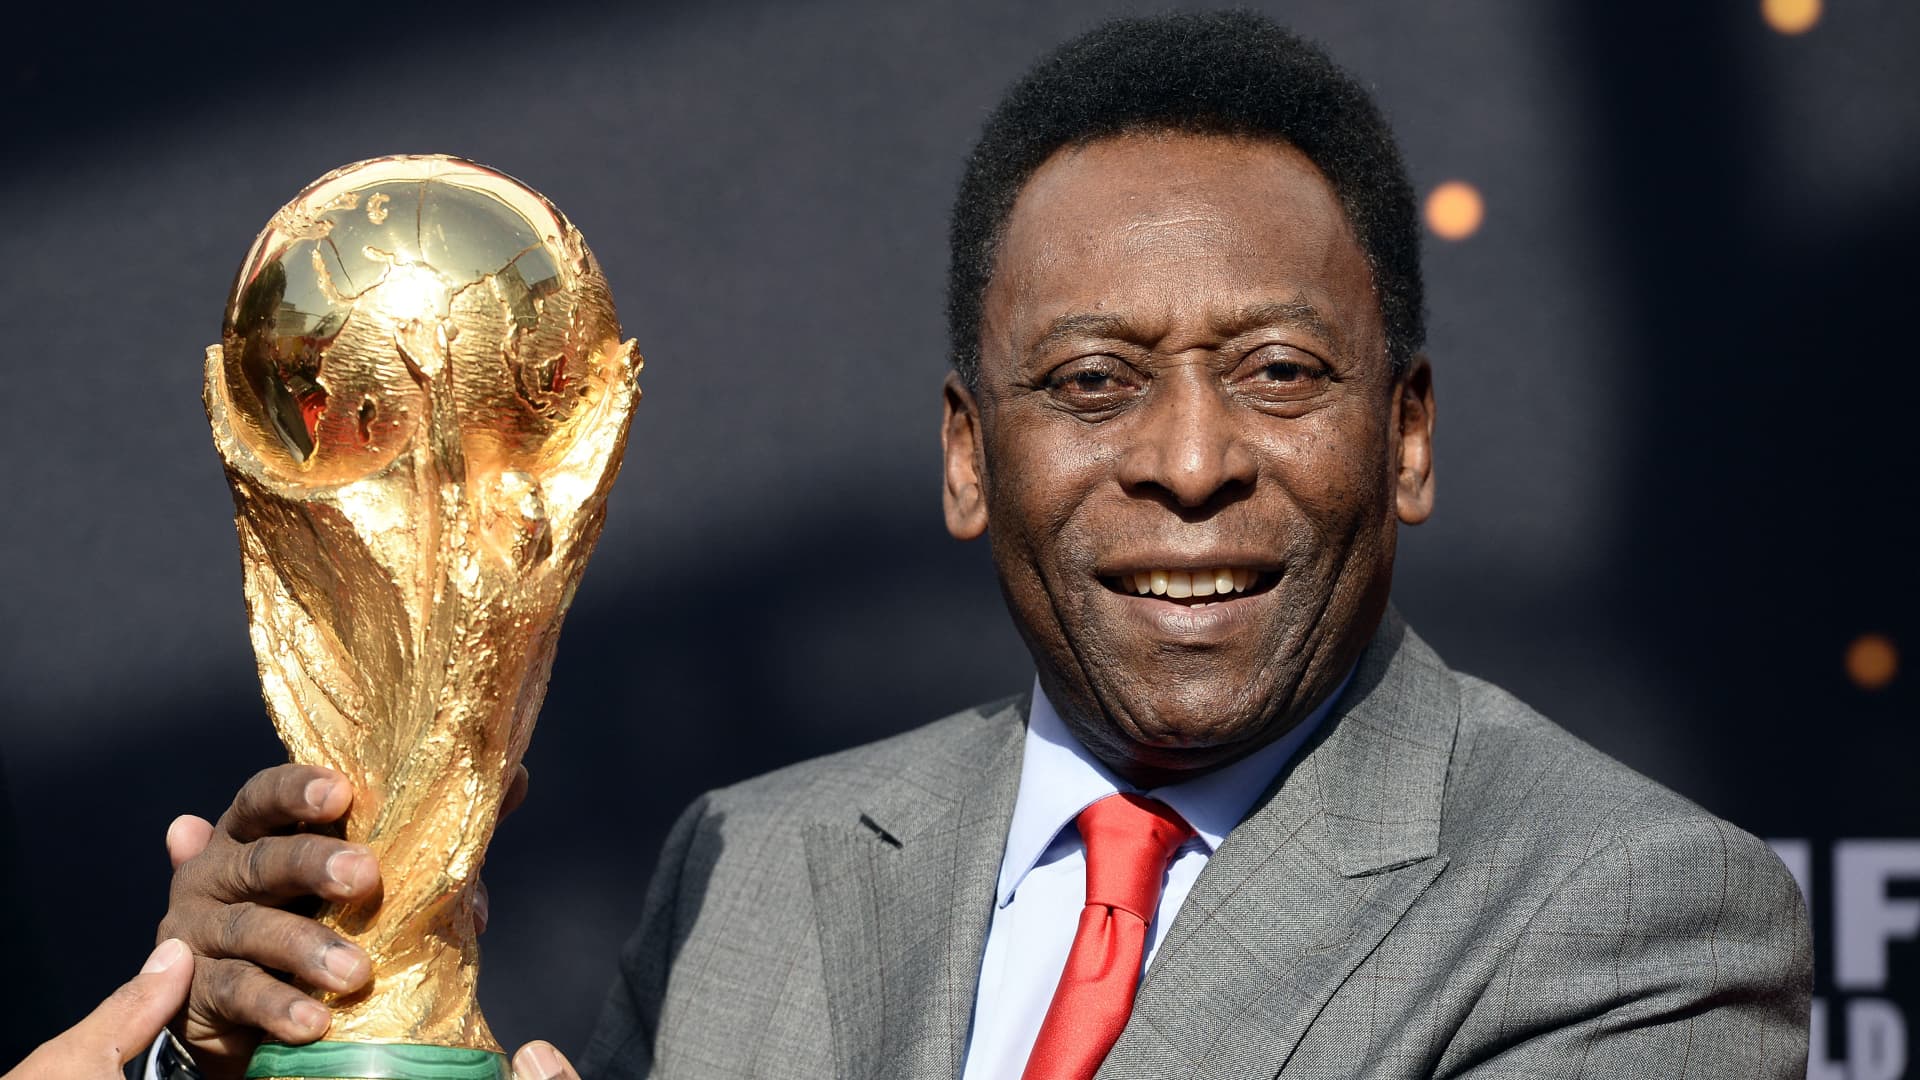 Brazilian soccer star Pele has passed away at the age of 82